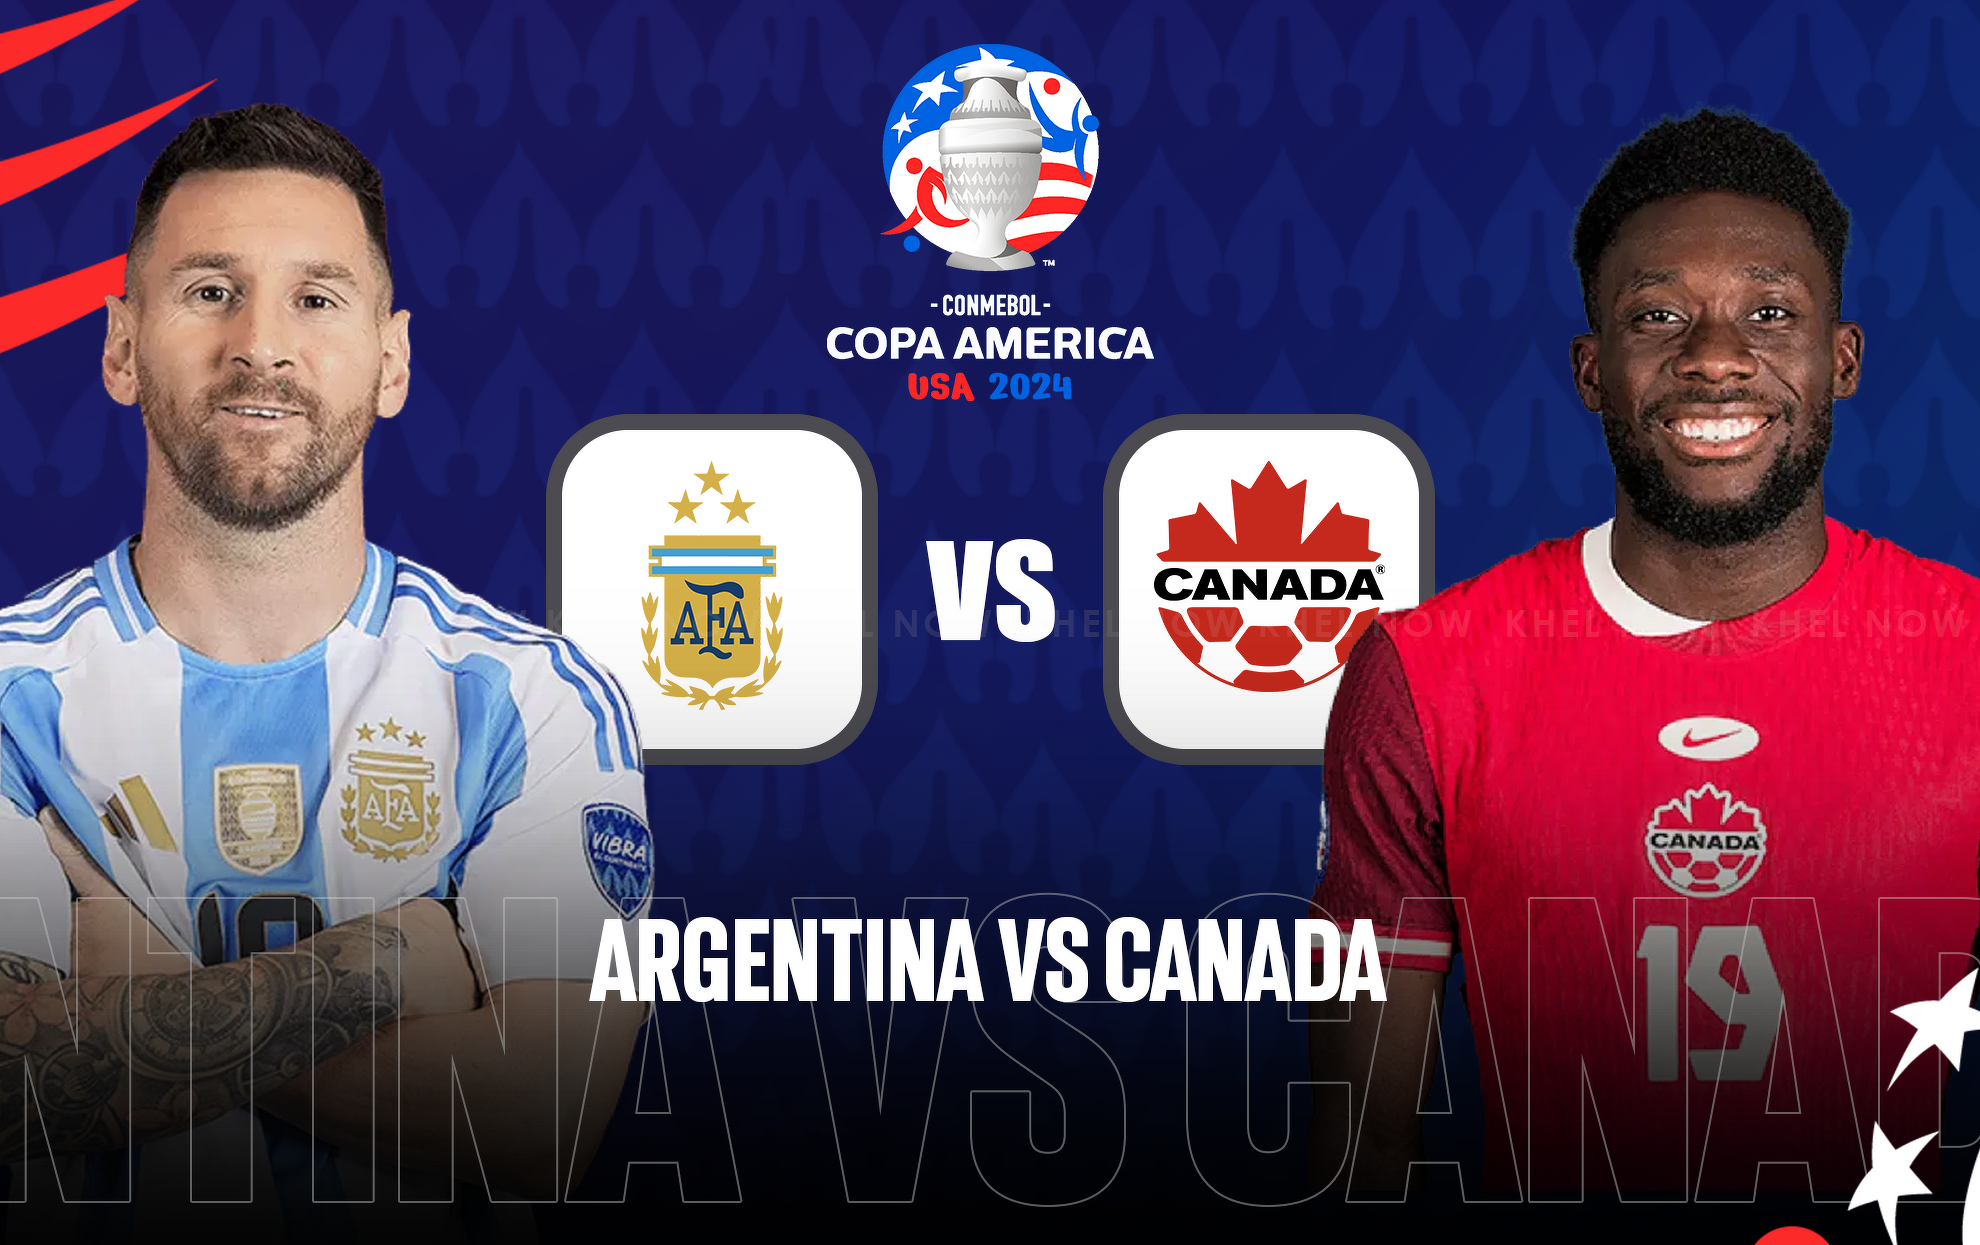 Argentina vs Canada Live streaming, TV channel, kickoff time & where